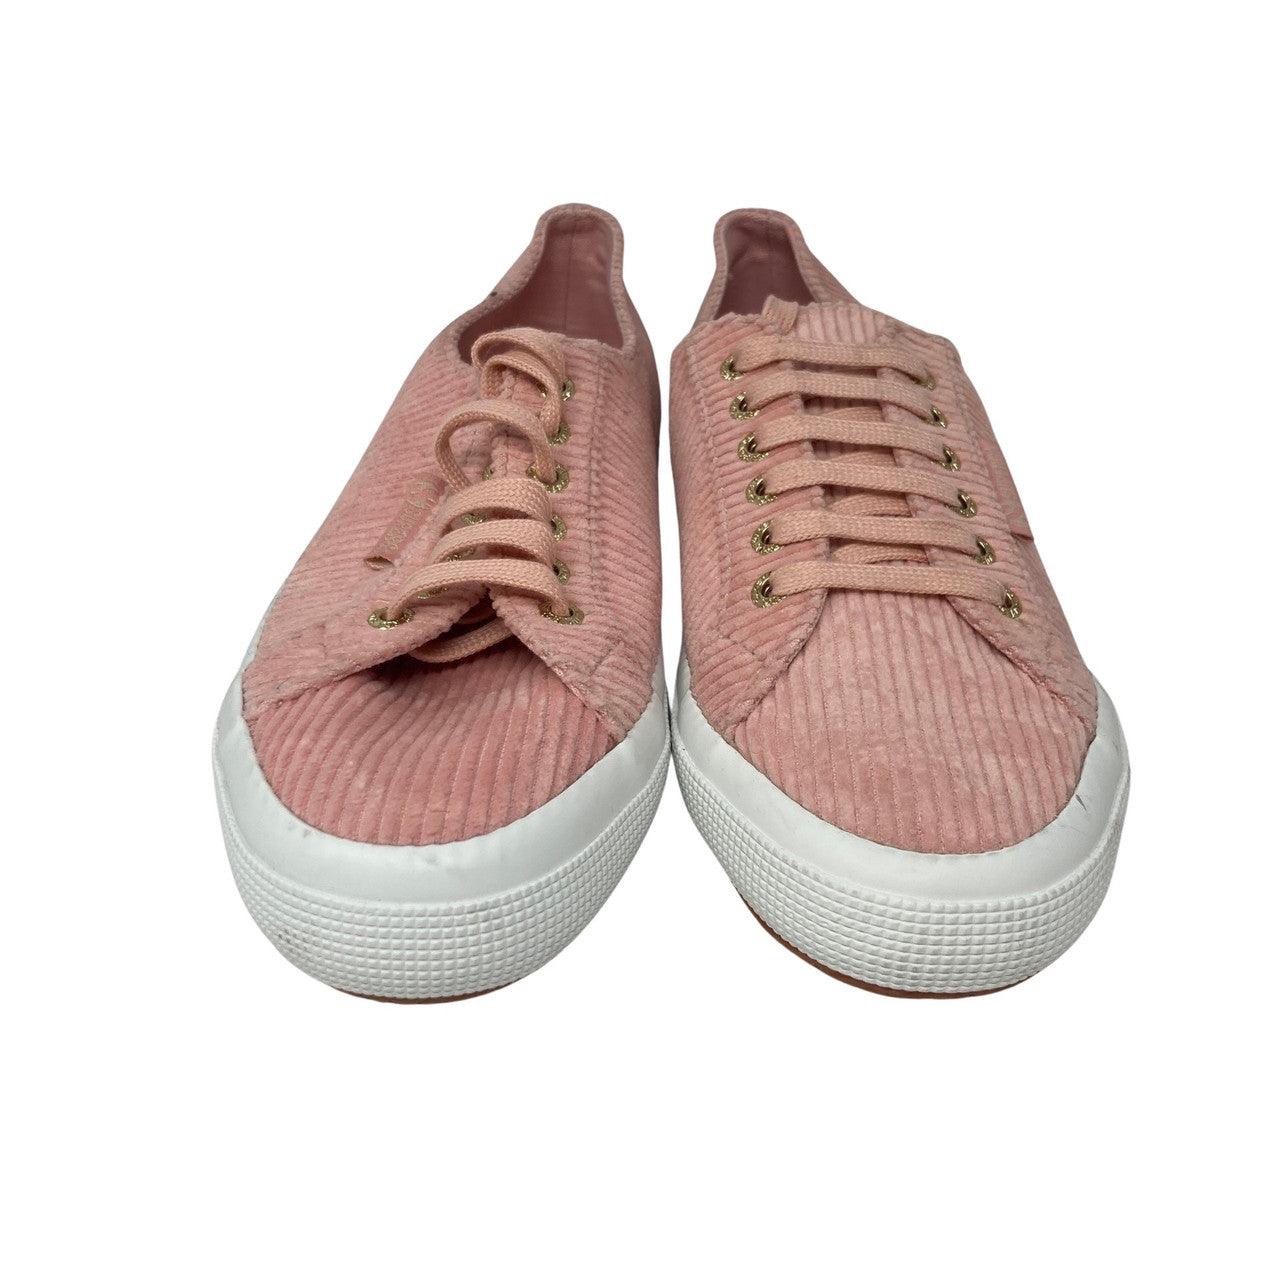 Superga X Something Navy Pink Cord Sneakers-front